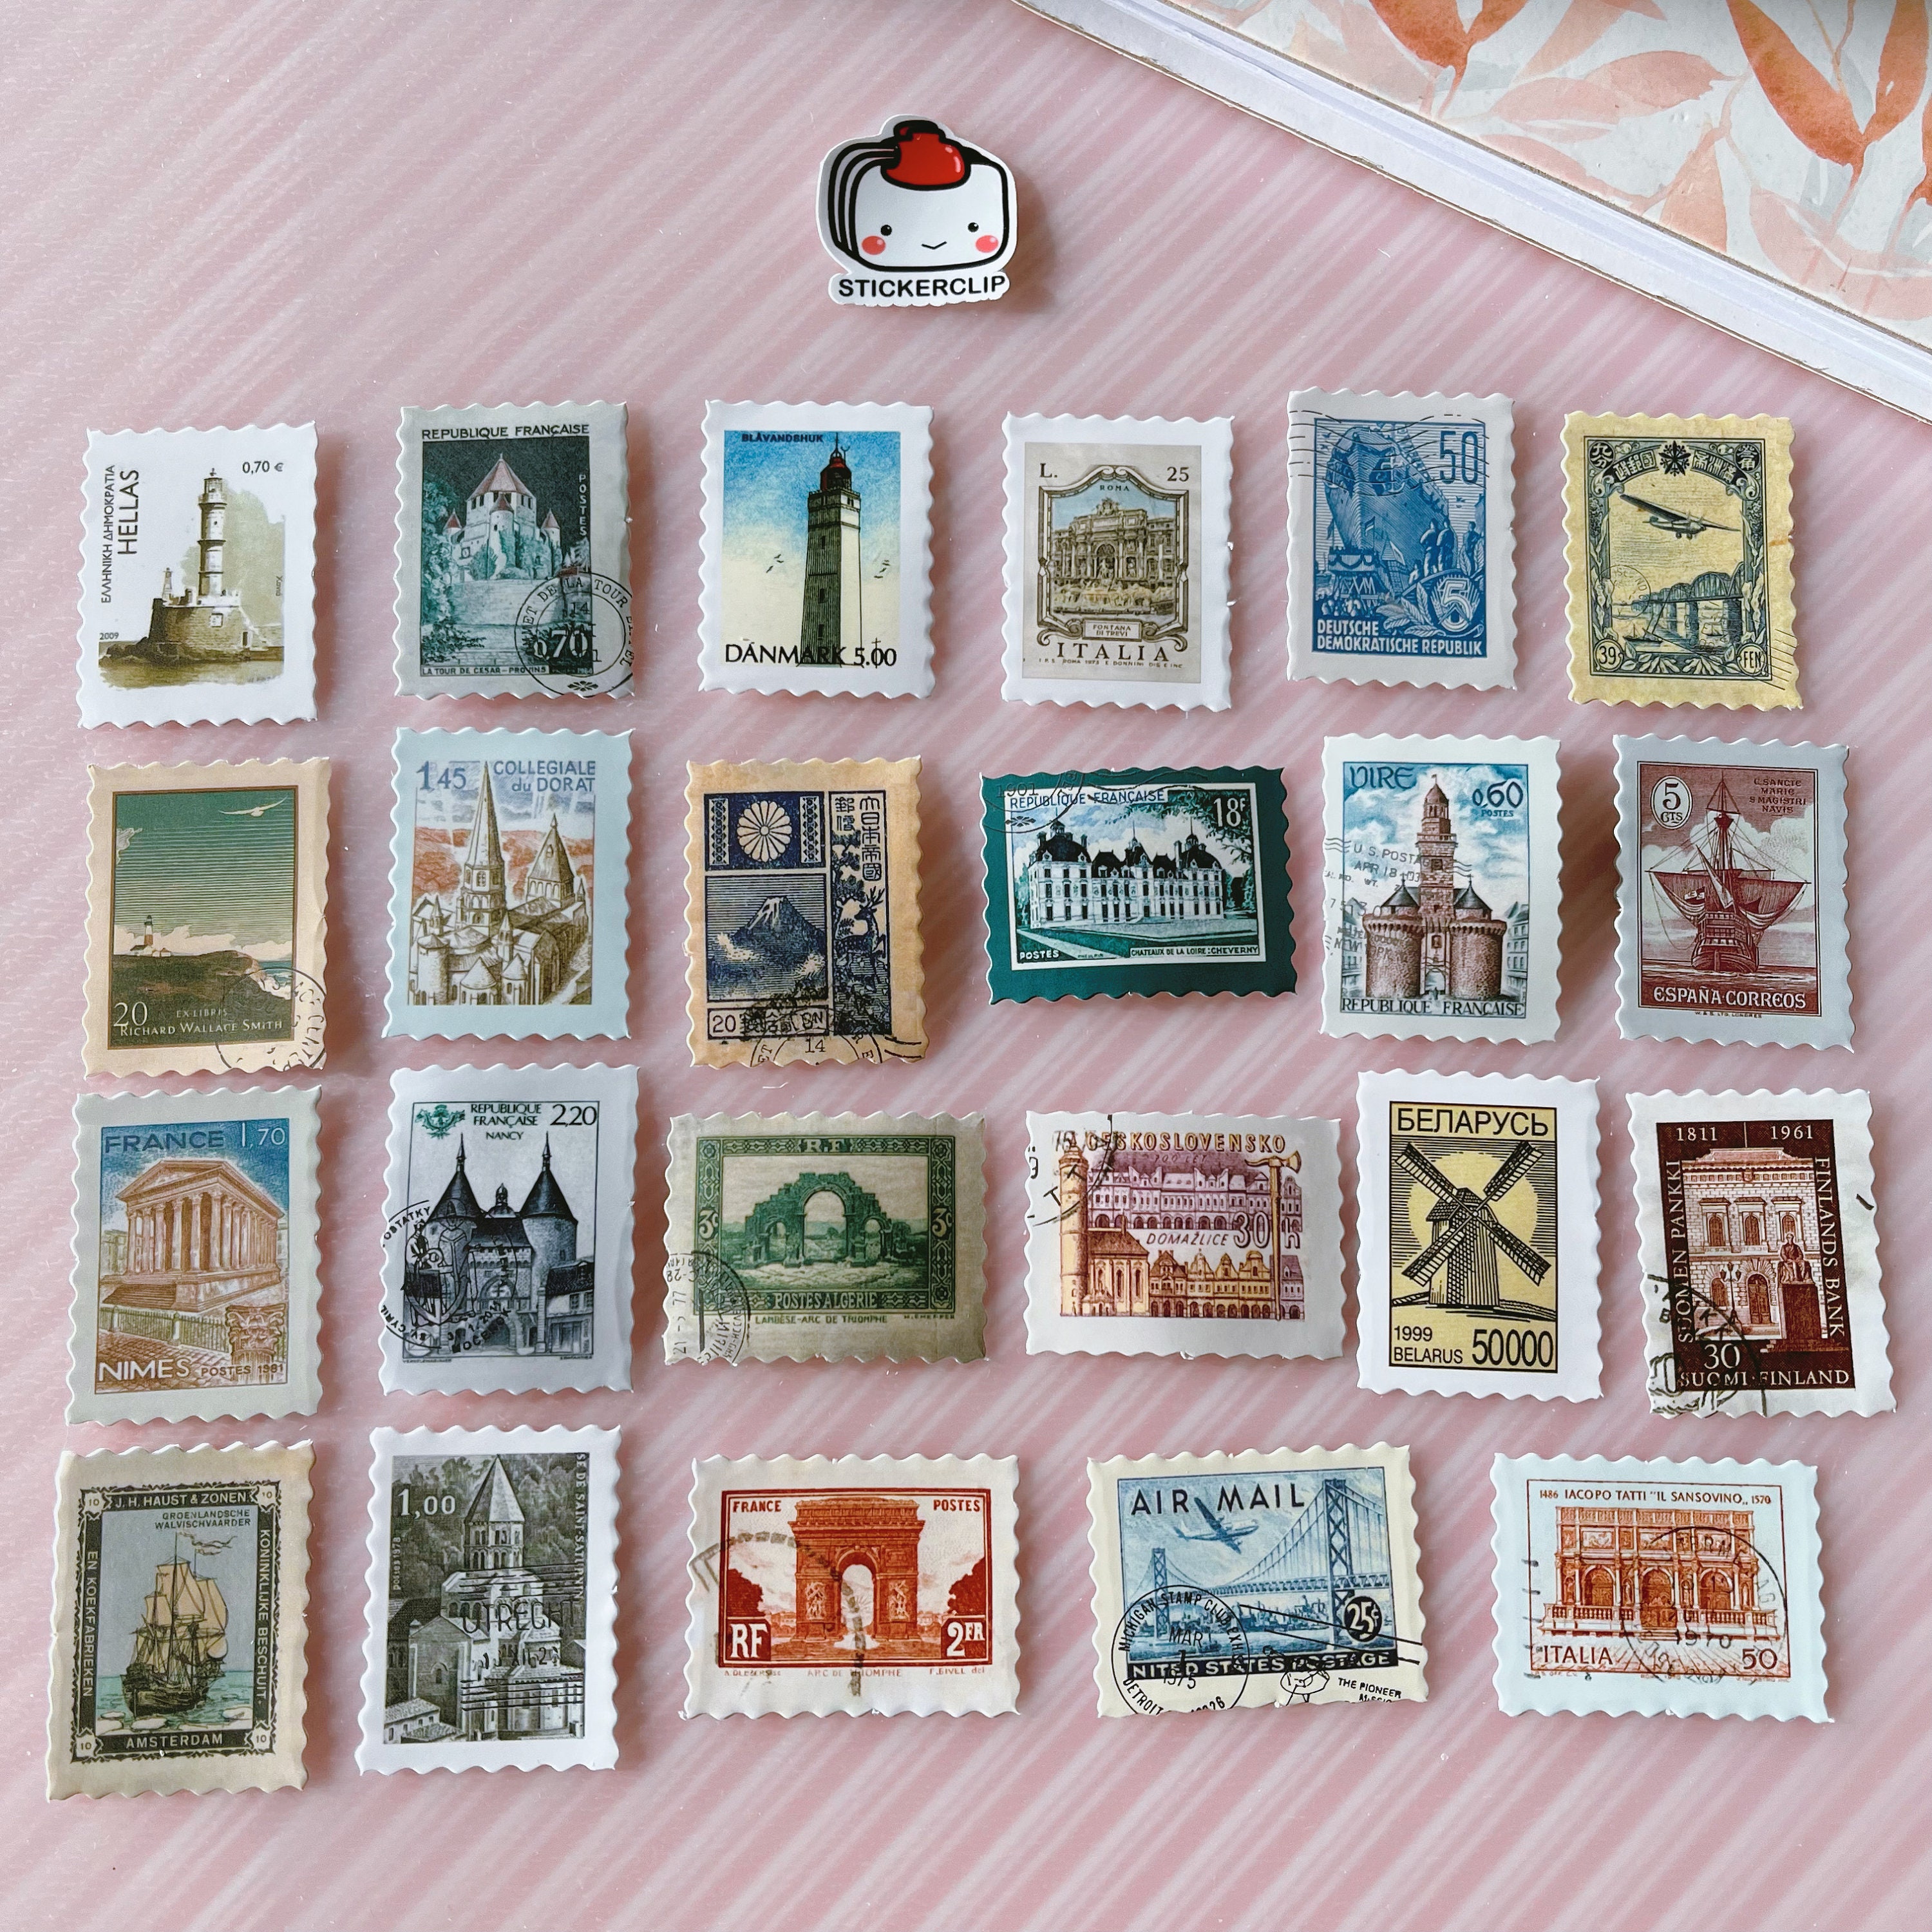 Cute Postage Stamps for Birthday or Scrapbook Design. Decorative Stickers  for Girls Stock Illustration - Illustration of food, funny: 111237141